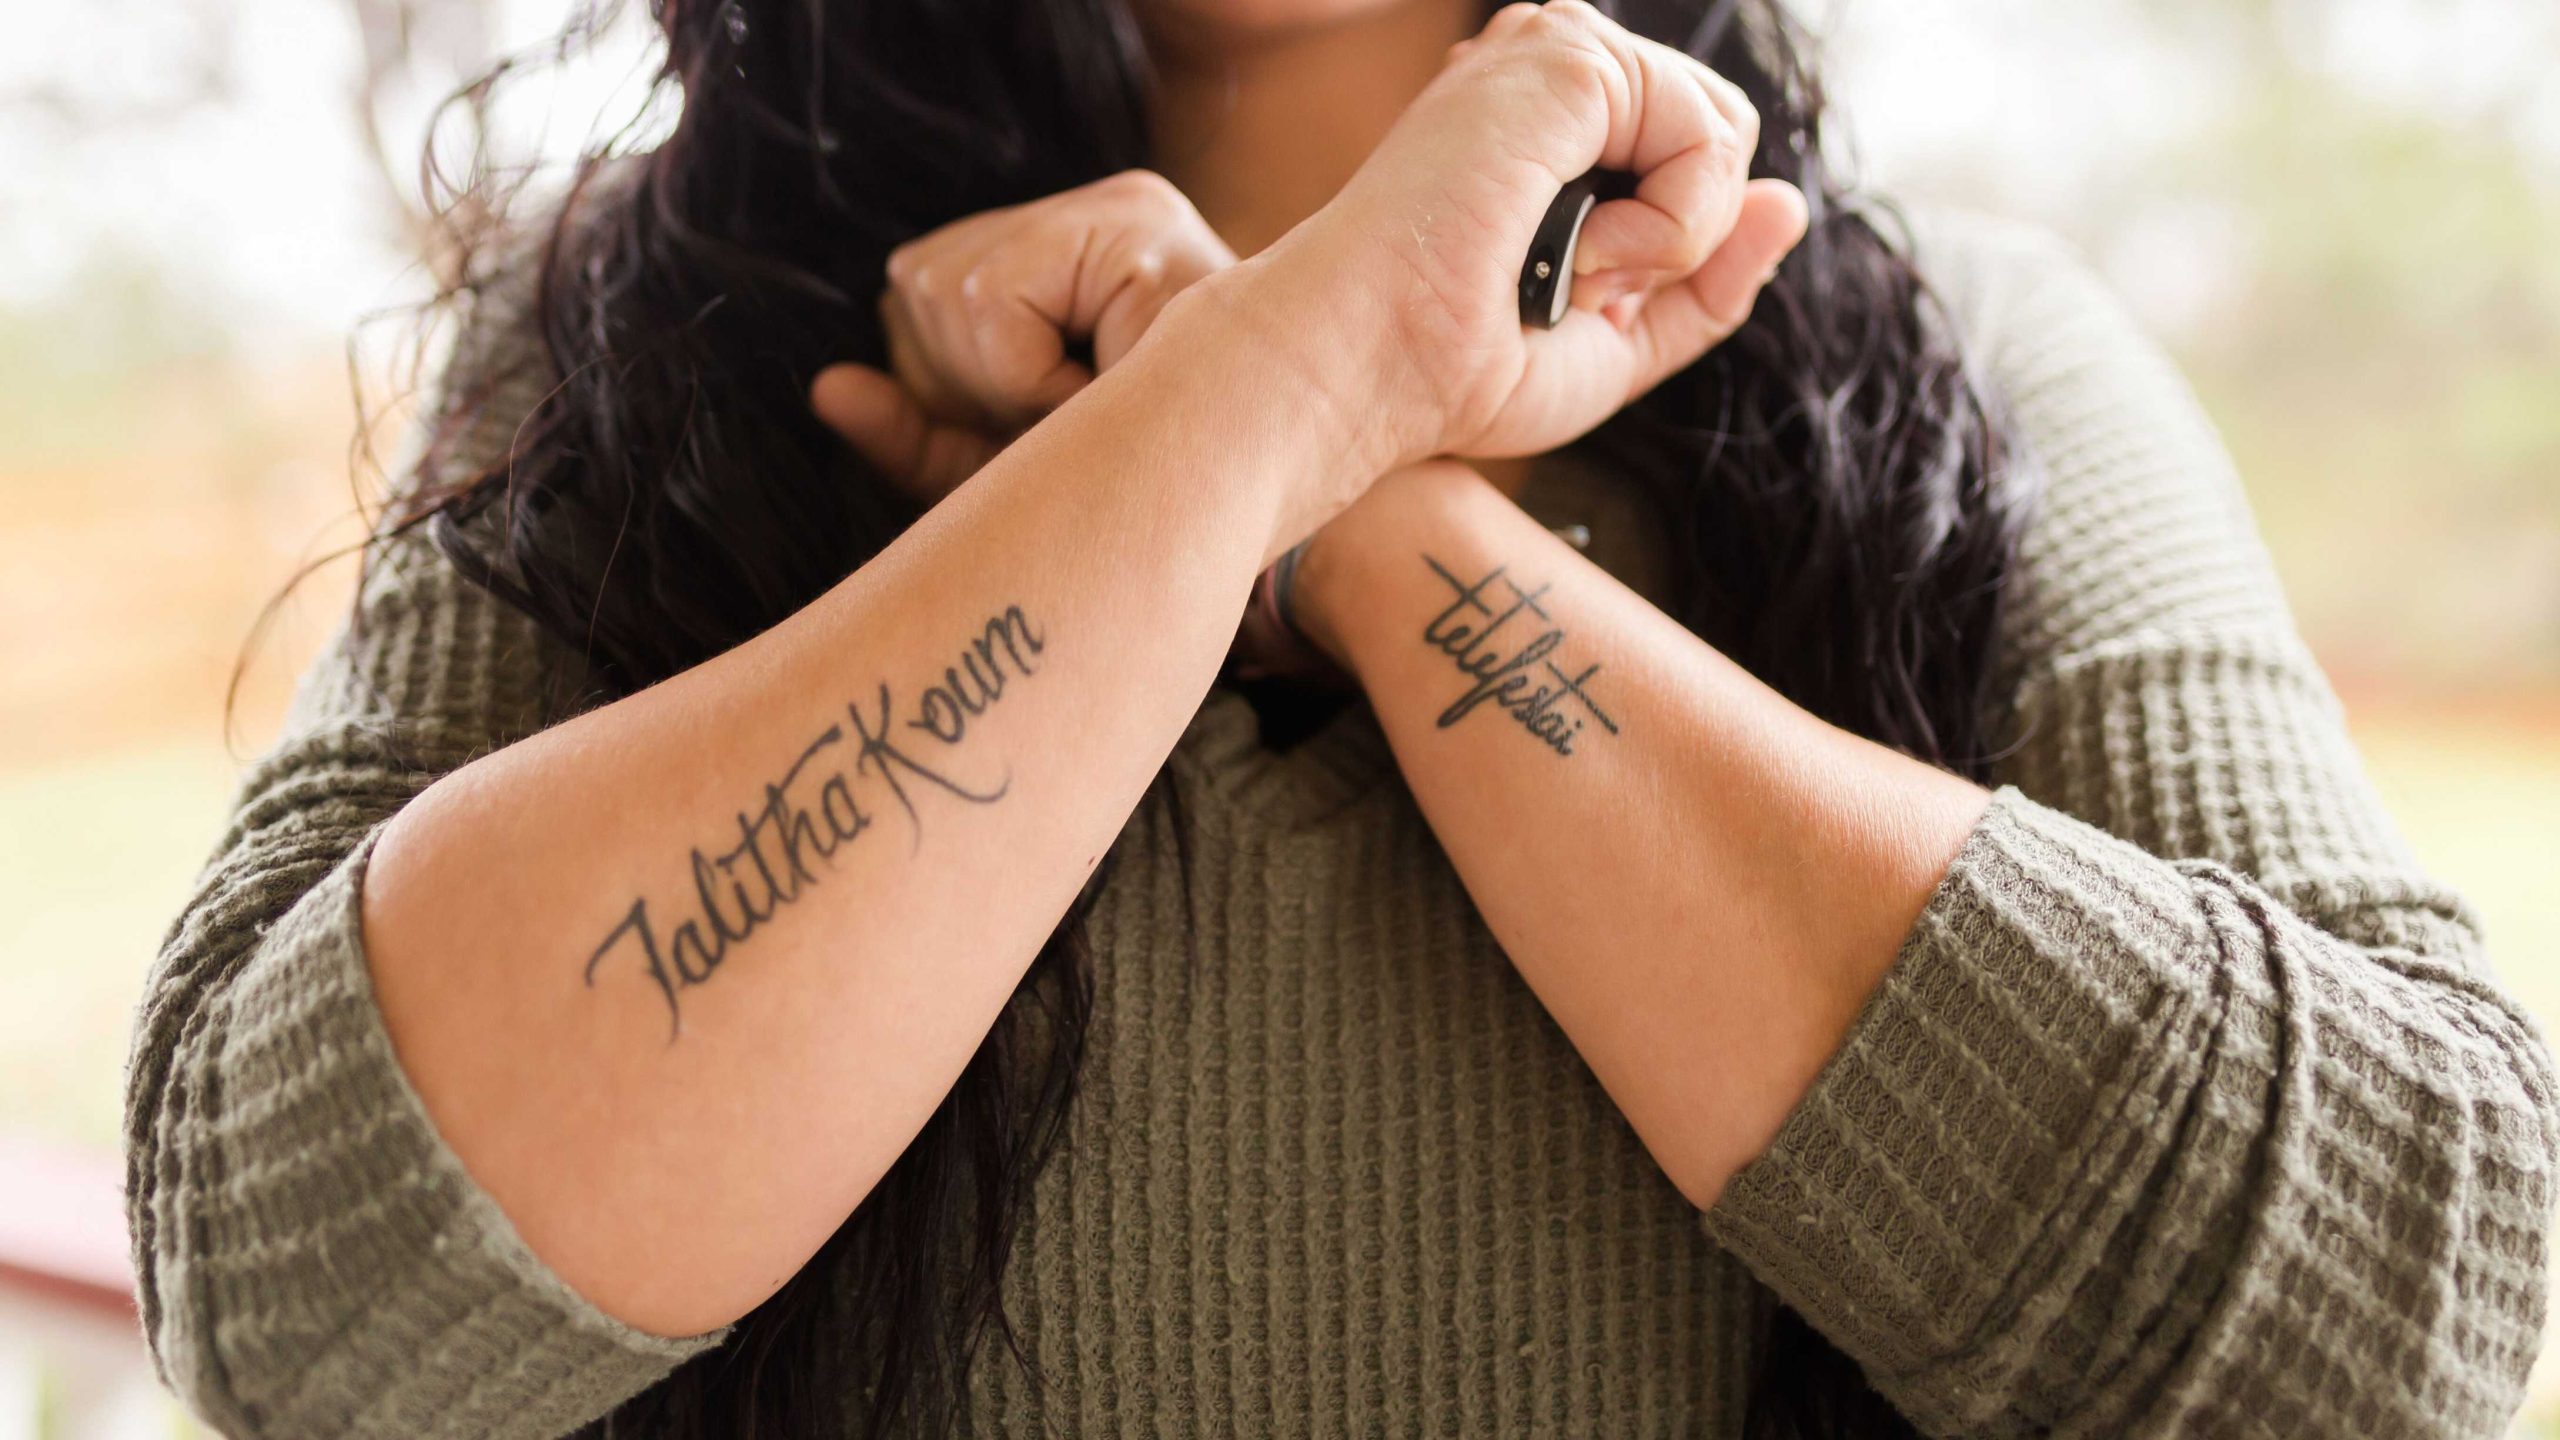 Tattoo therapy: How ink helps sexual assault survivors heal  CNN